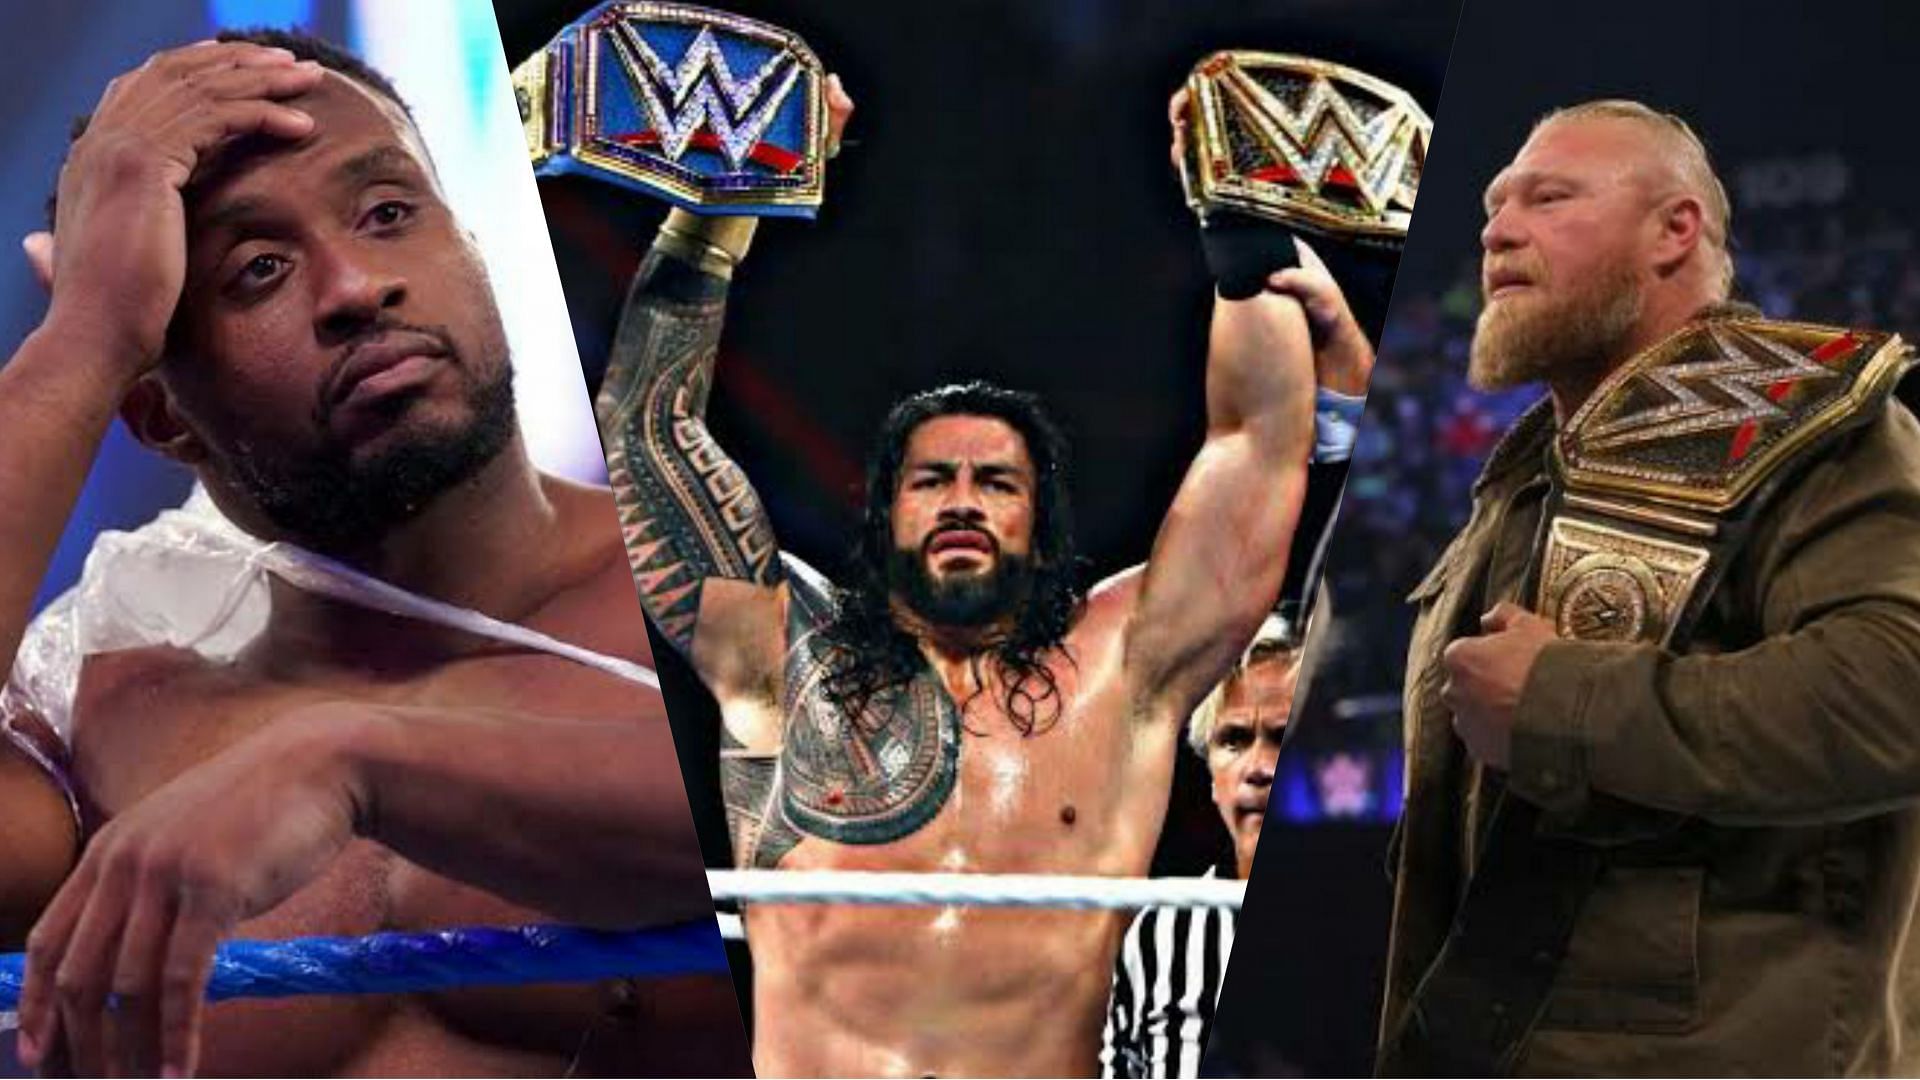 Will Roman Reigns win at WrestleMania 38? (Middle picture credits: u/c_abernethy on Reddit)